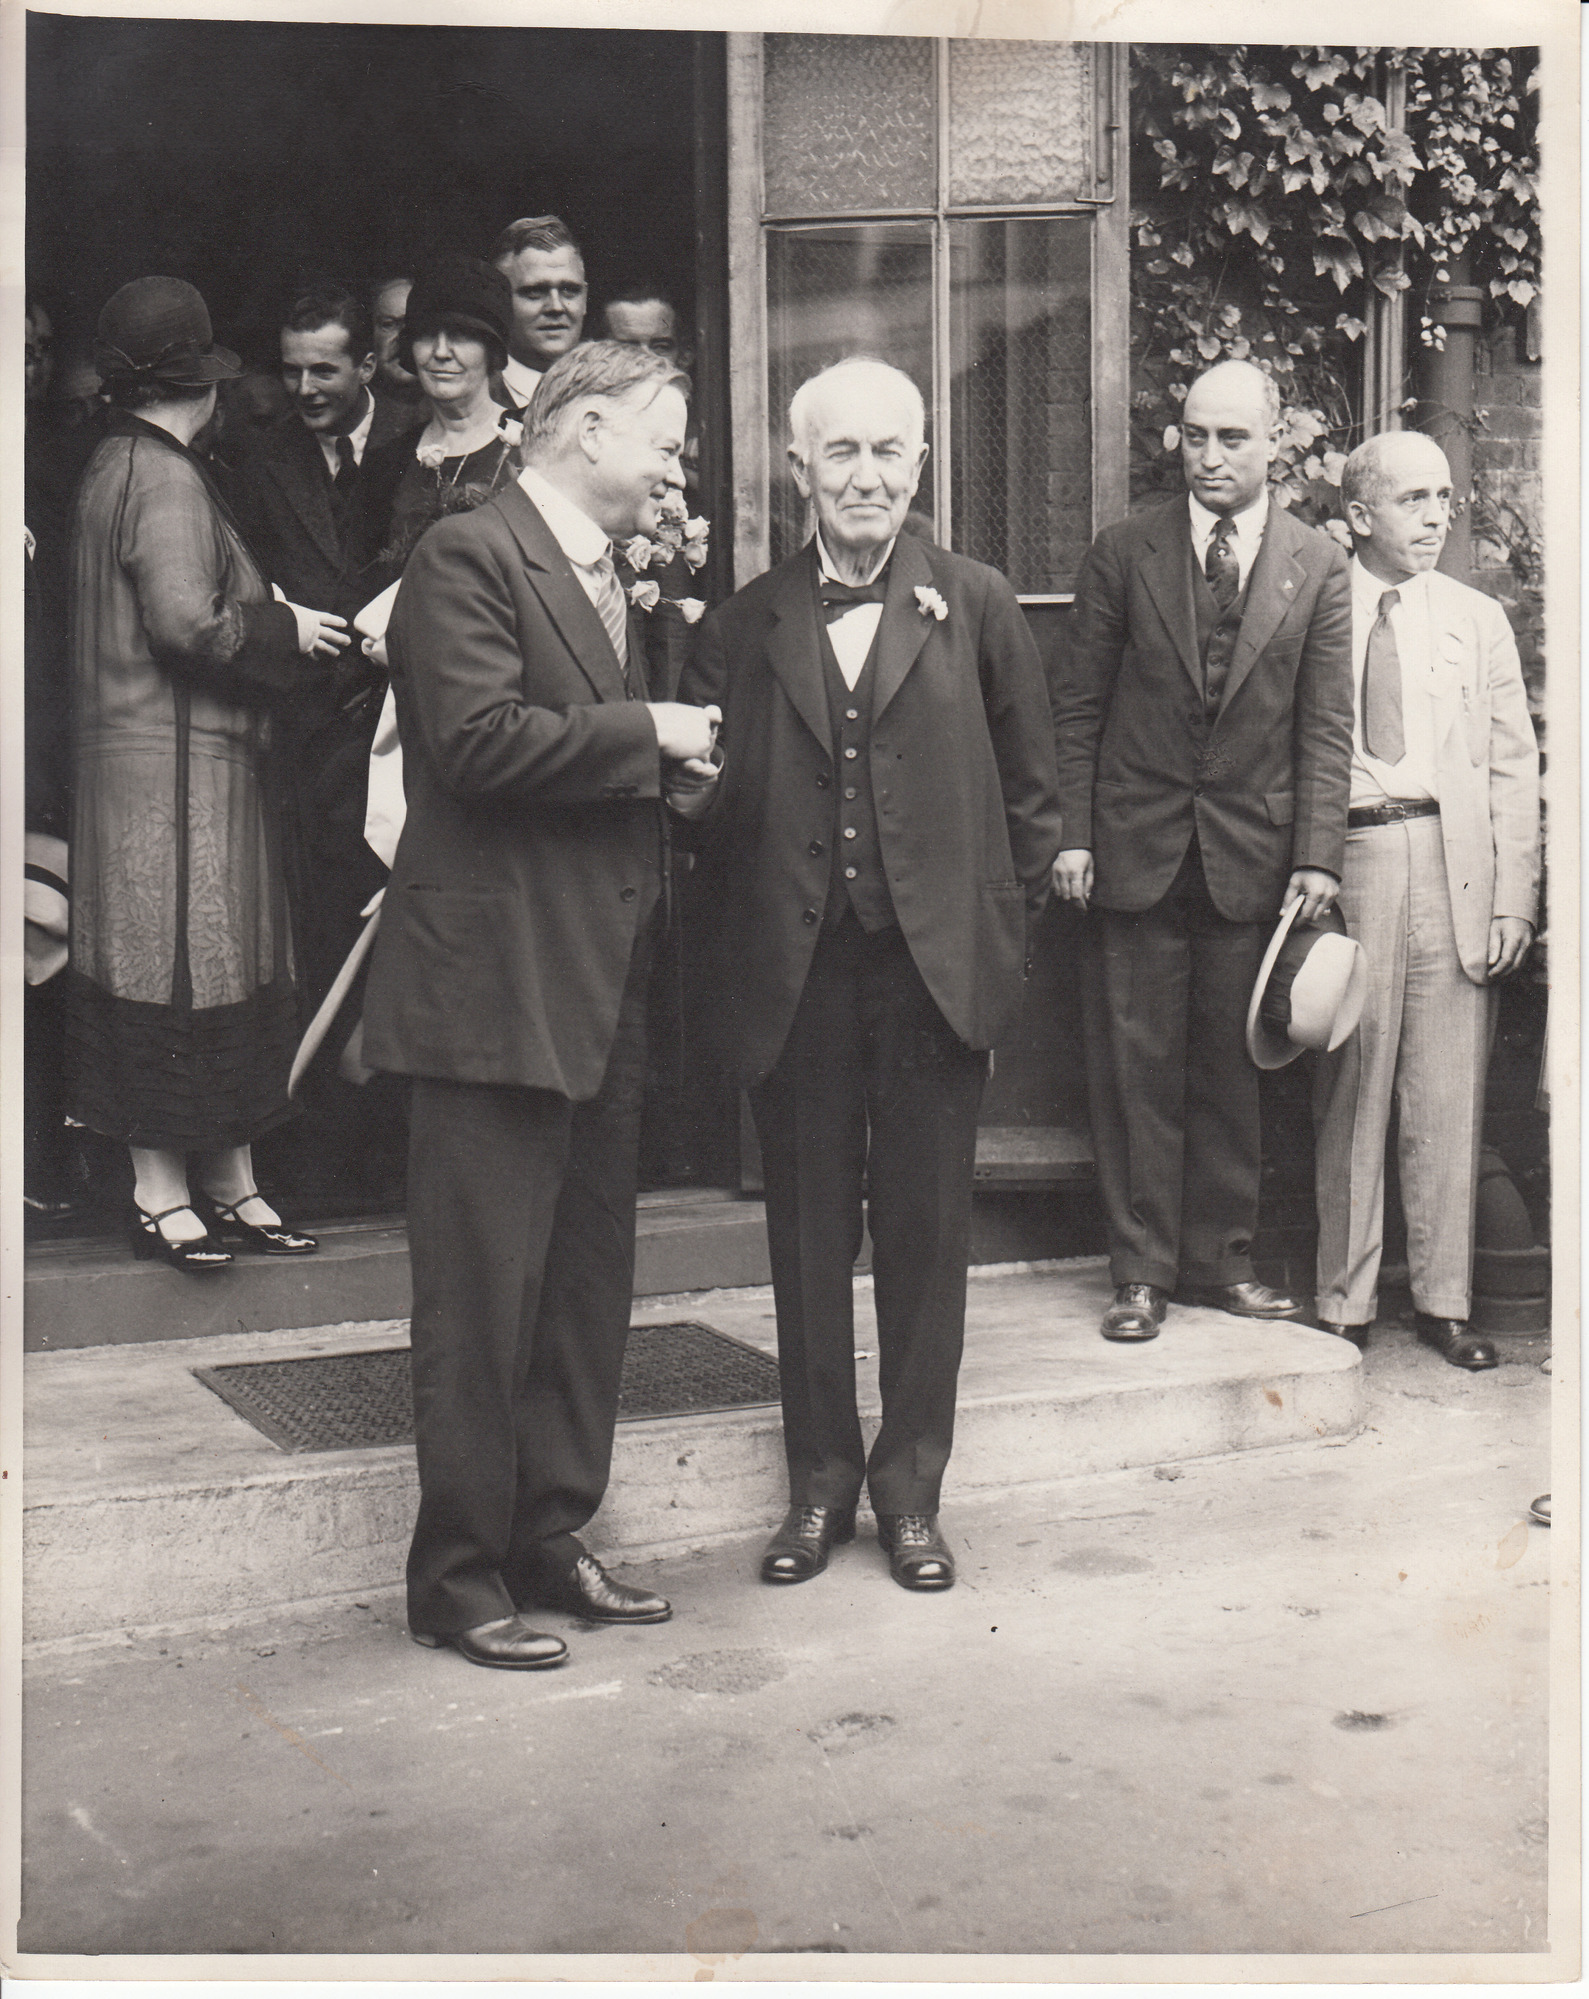 Herbert Hoover with Thomas Edison at West Orange Laboratory for "Hoover Day."